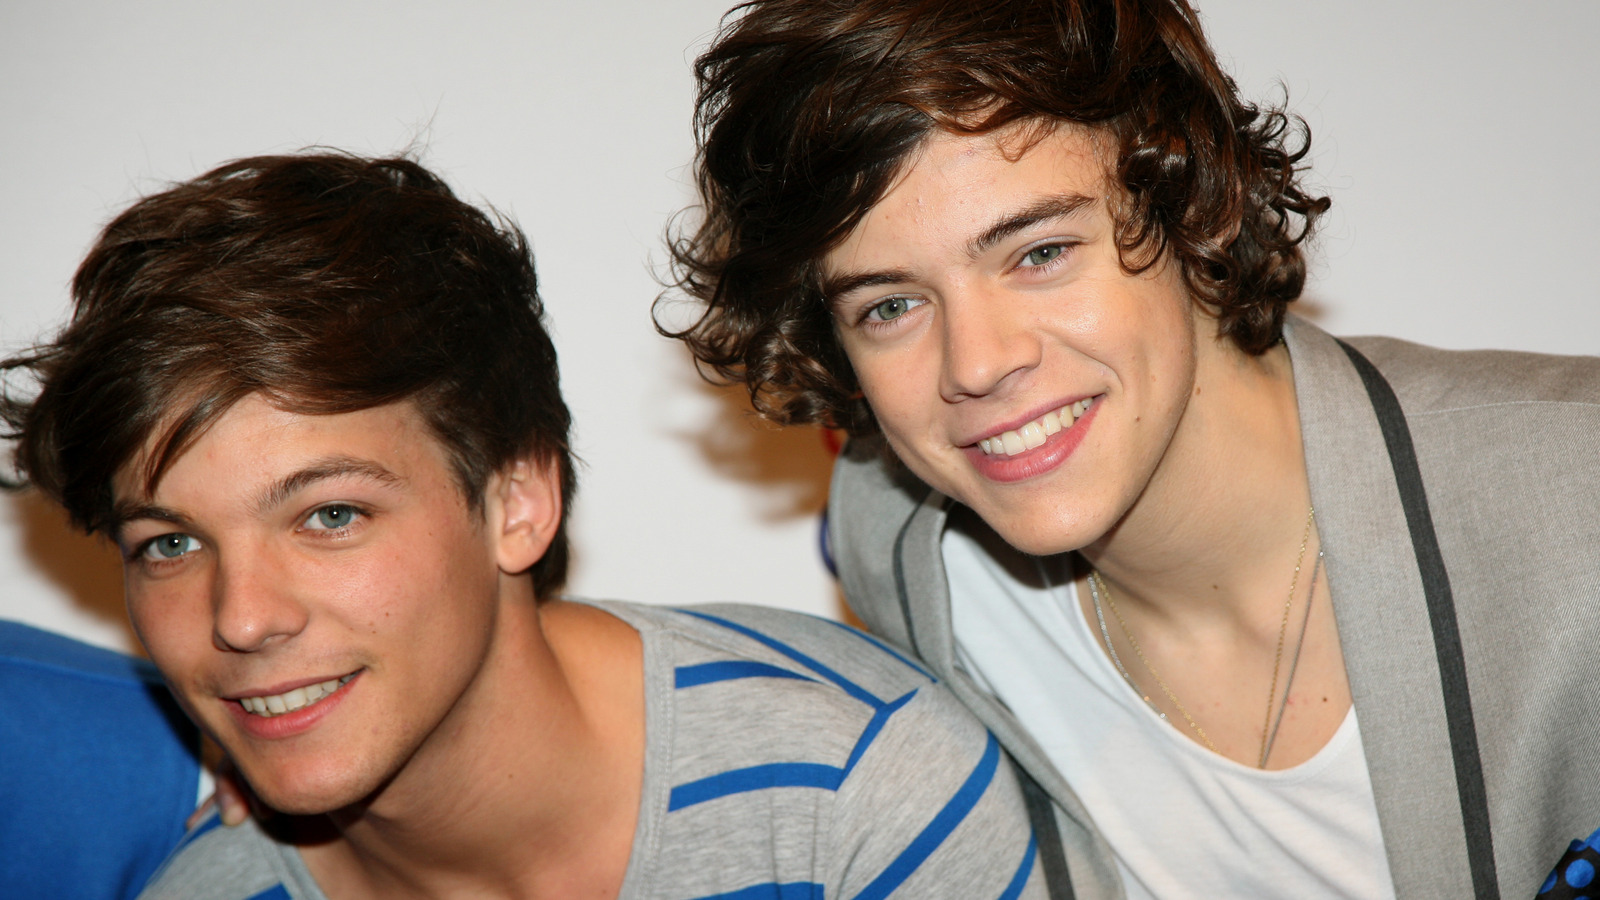 Harry Styles and Louis Tomlinson's friendship over the years